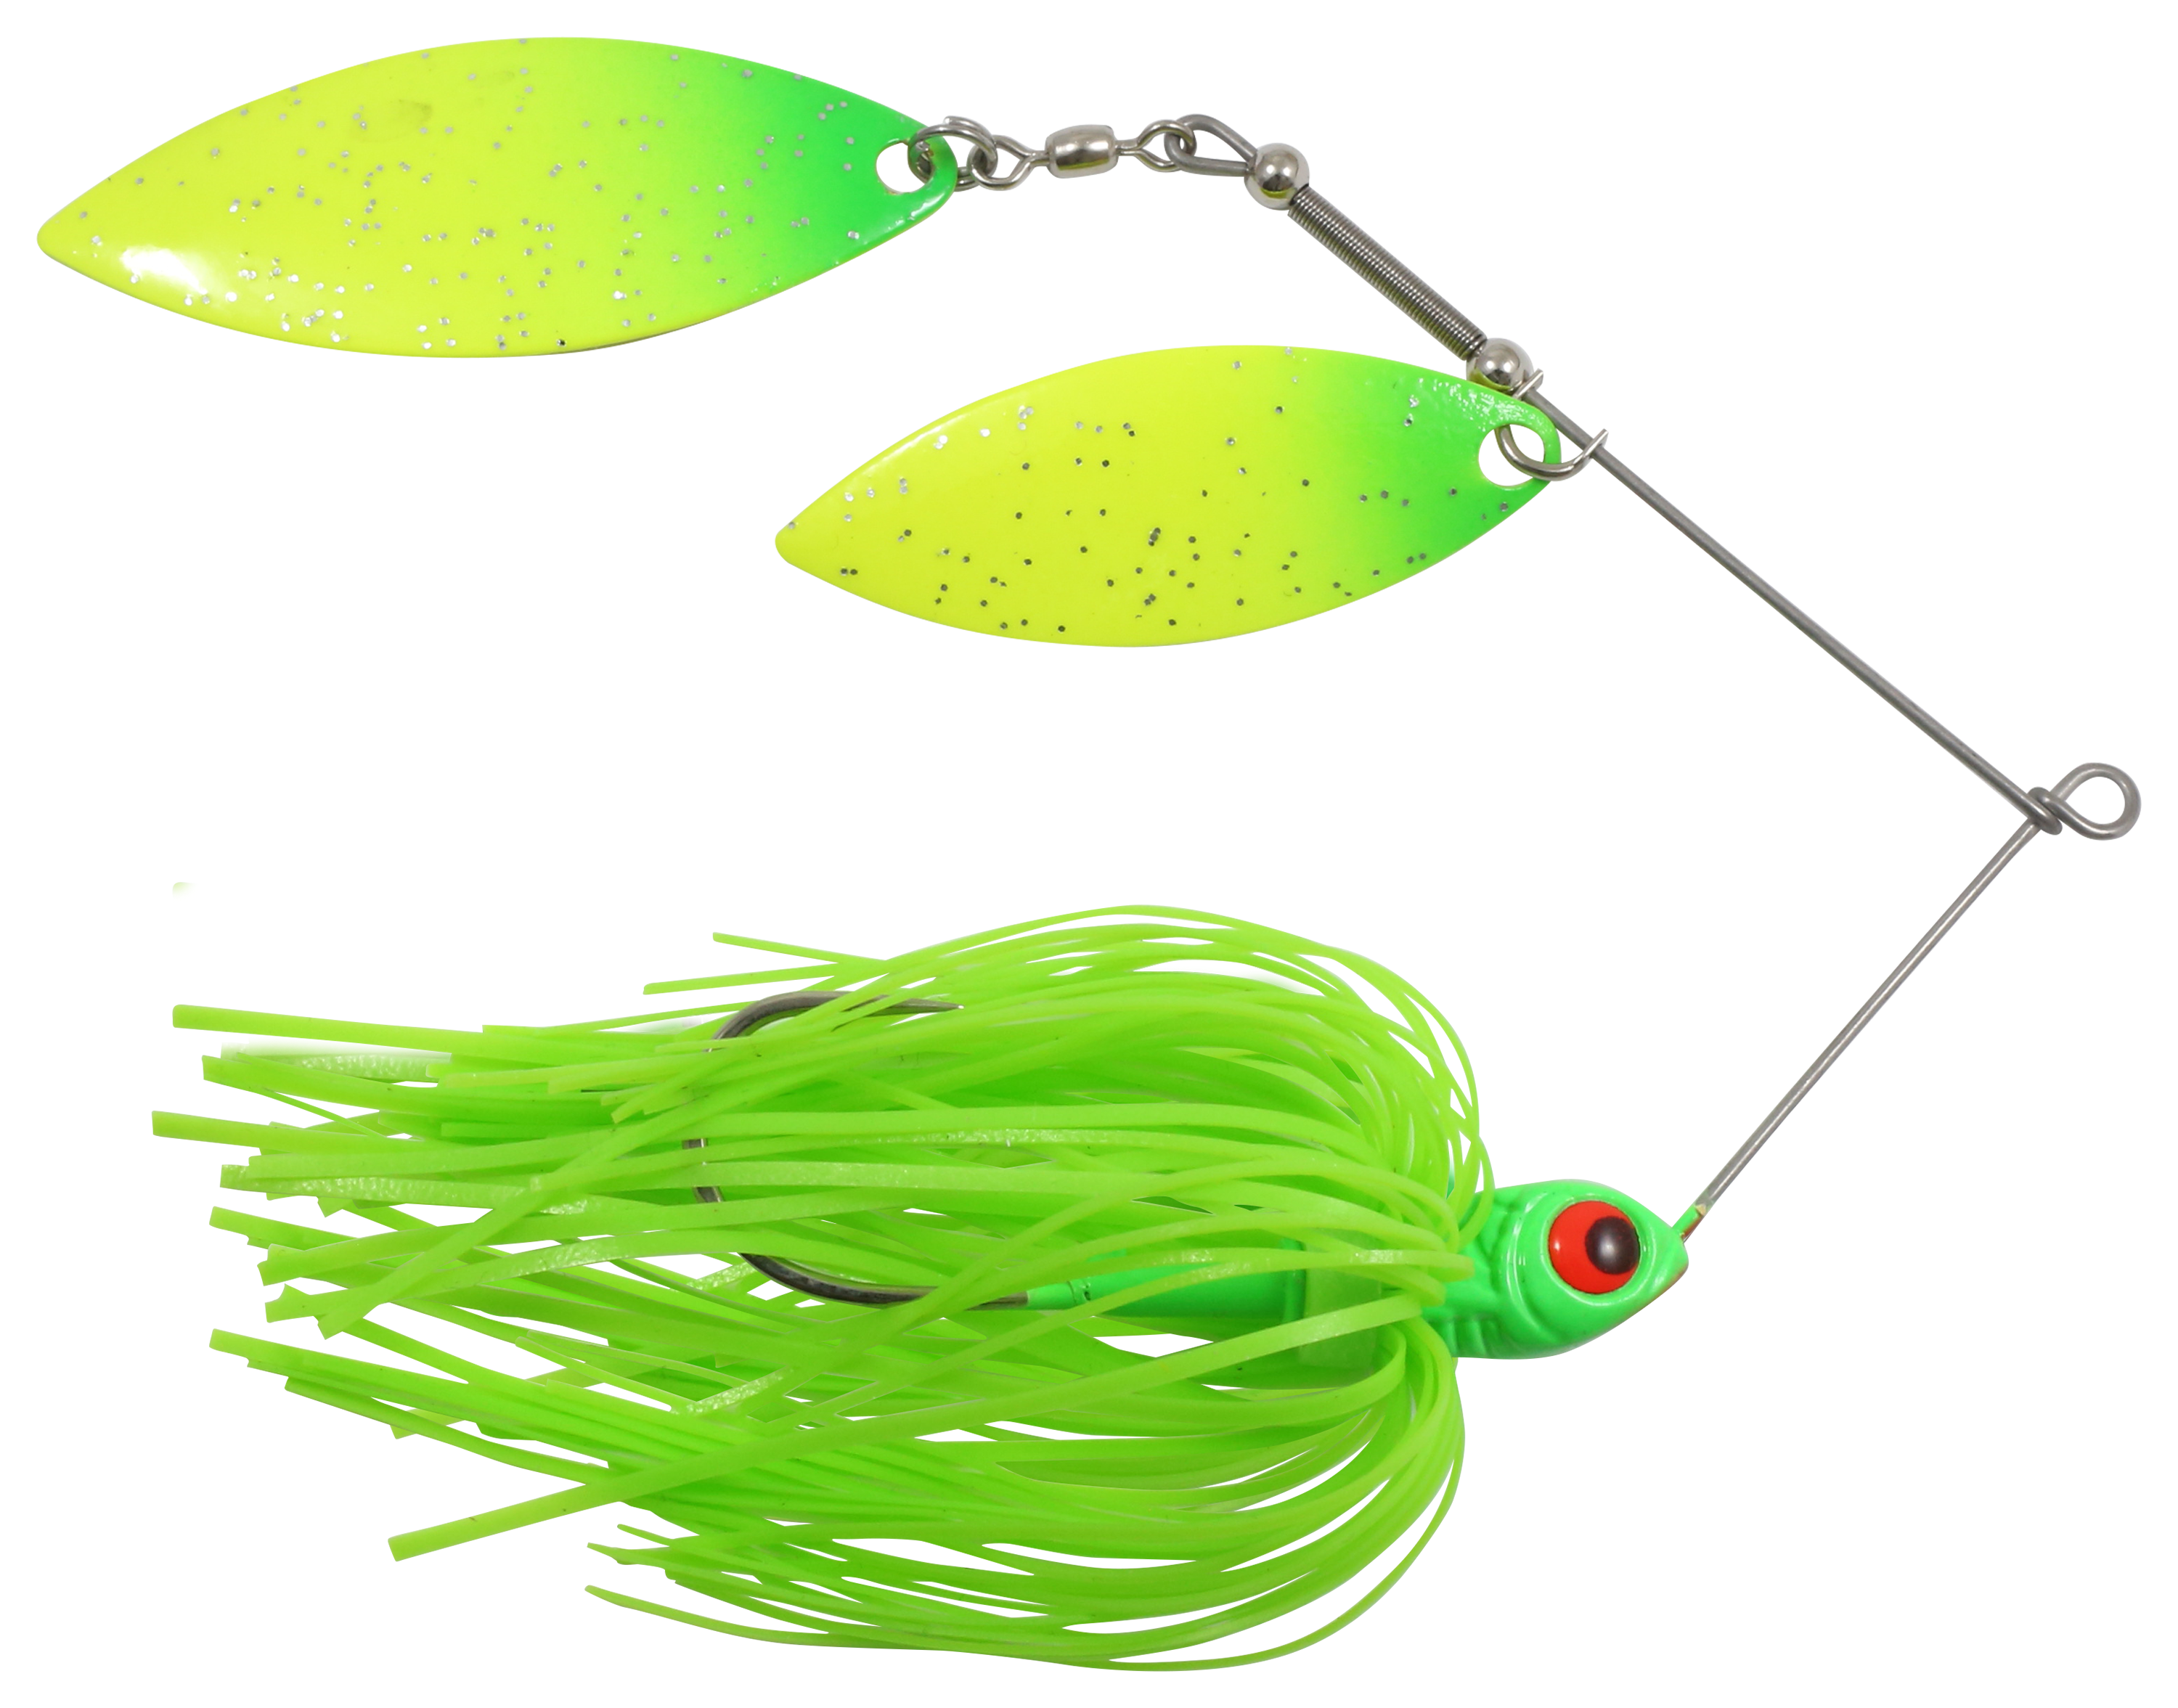 NORTHLAND FISHING TACKLE REED-RUNNER TANDEM SPIN